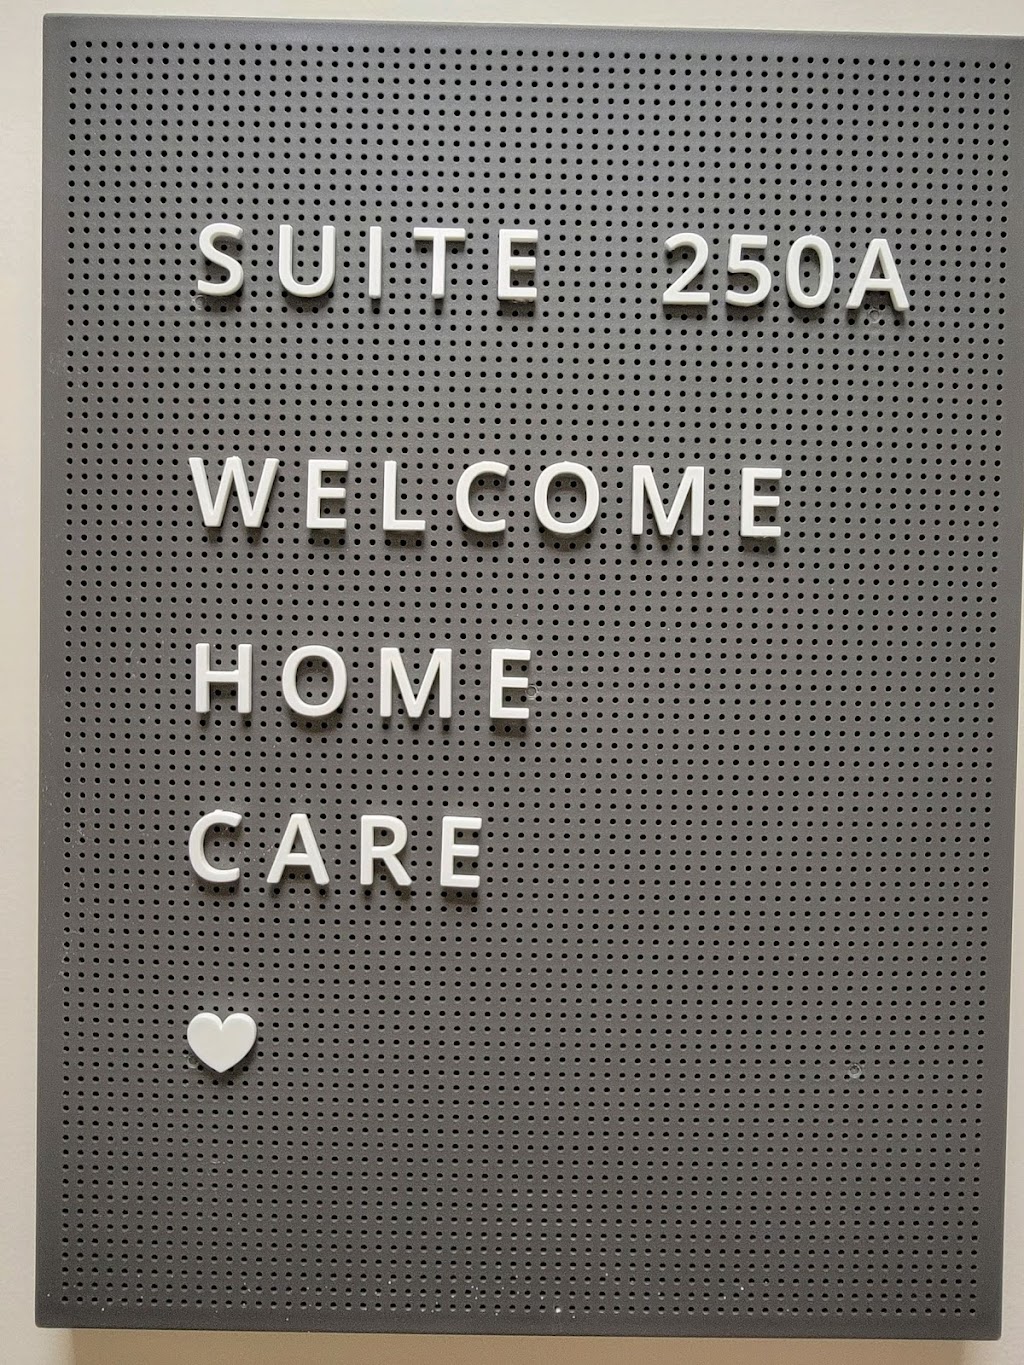 Welcome Home Care | 555 Mason St Ste 250A, Vacaville, CA 95688 | Phone: (707) 234-5503